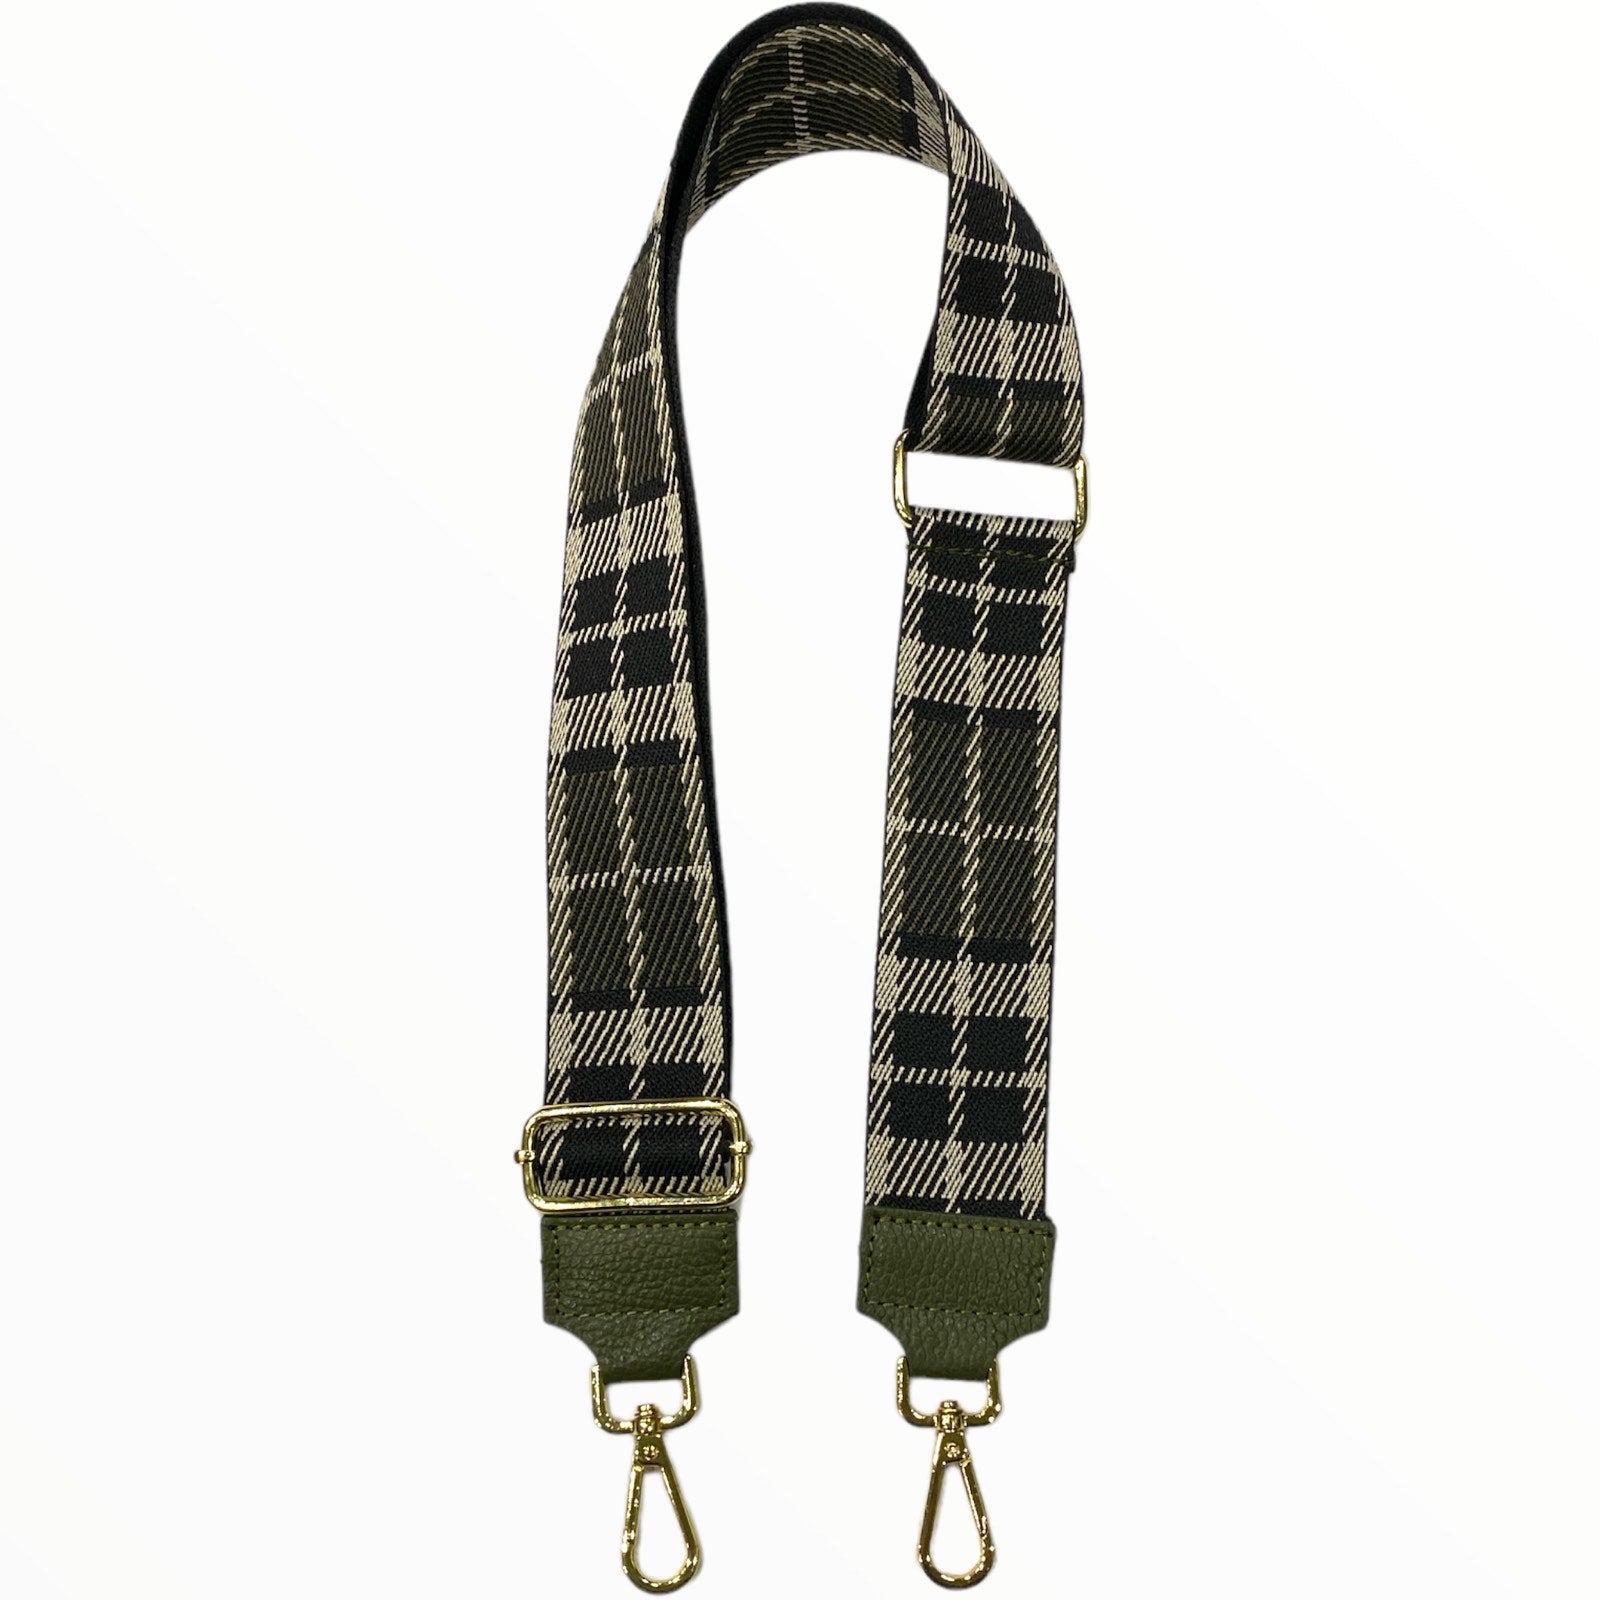 Olive green Scottish print adjustable strap with gold metals